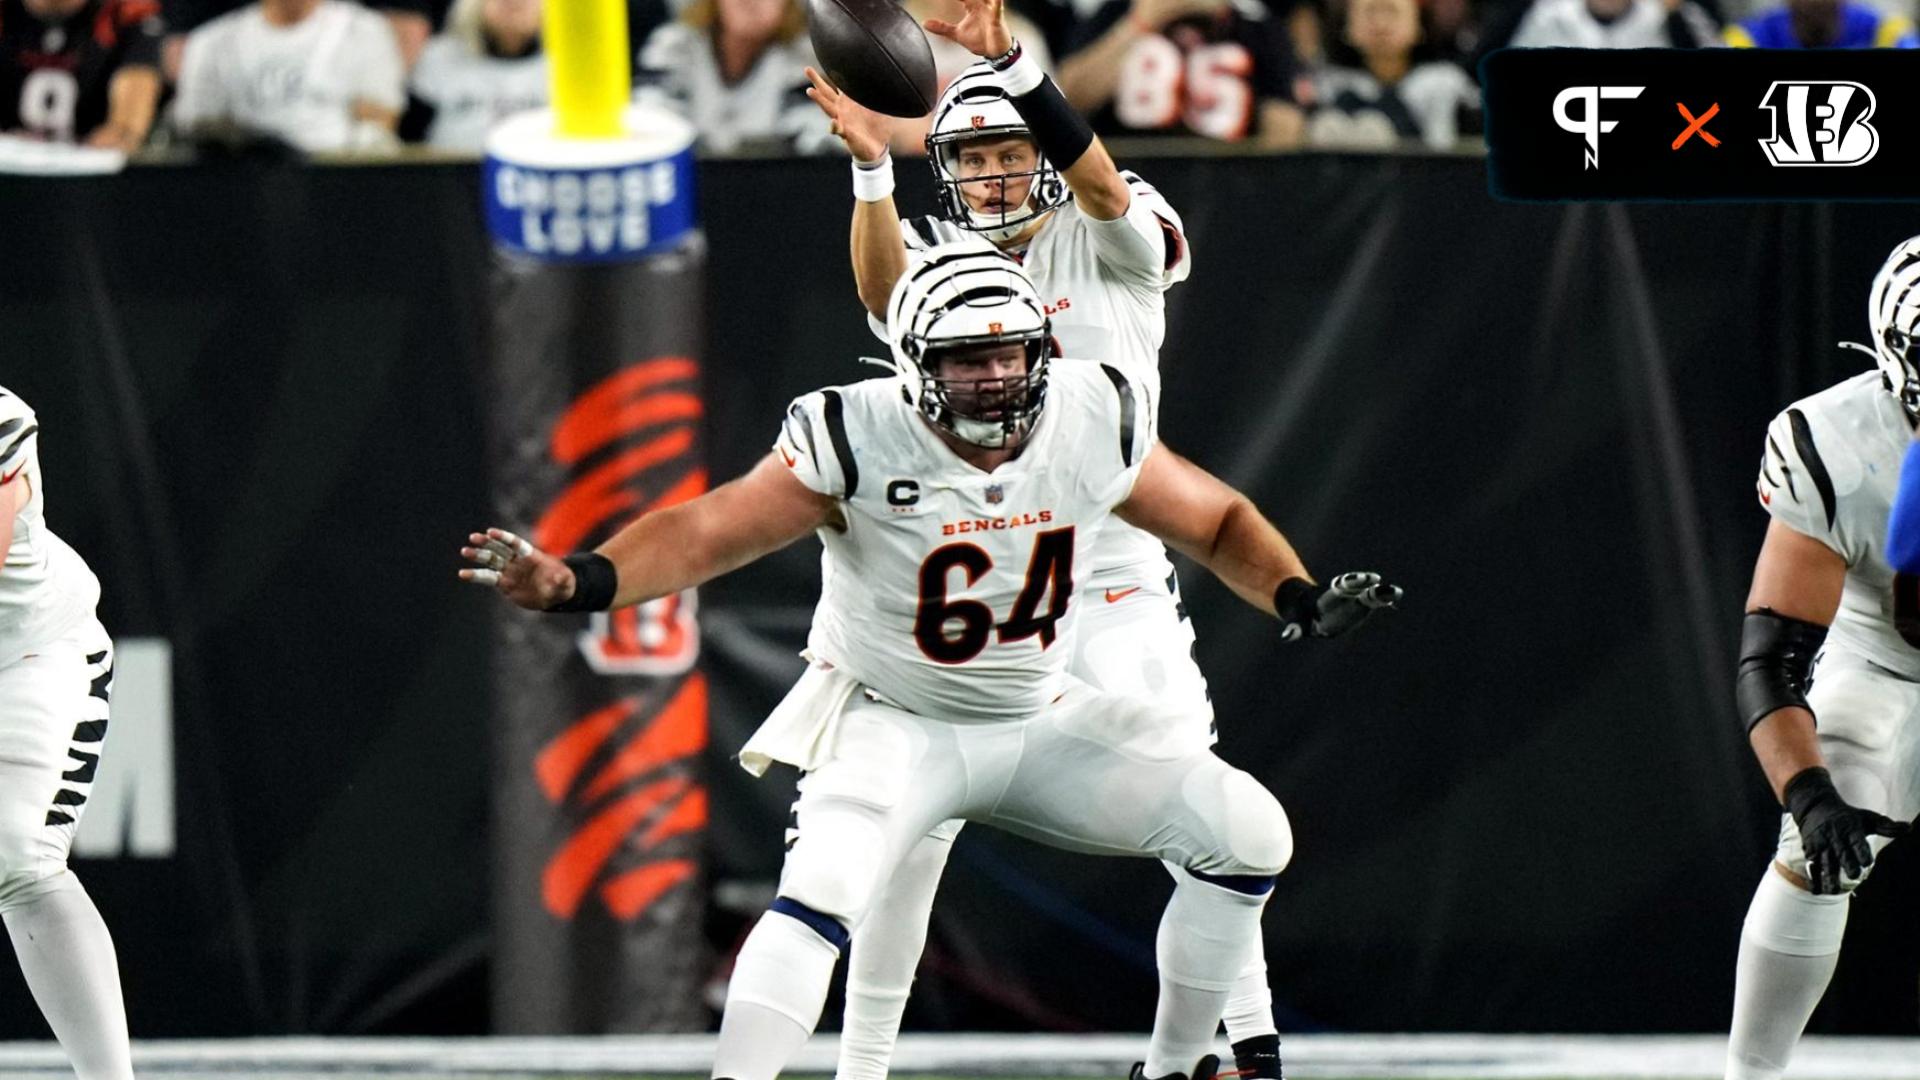 Right Up Yours, Tennessee' - No Regrets for Bengals Center Ted